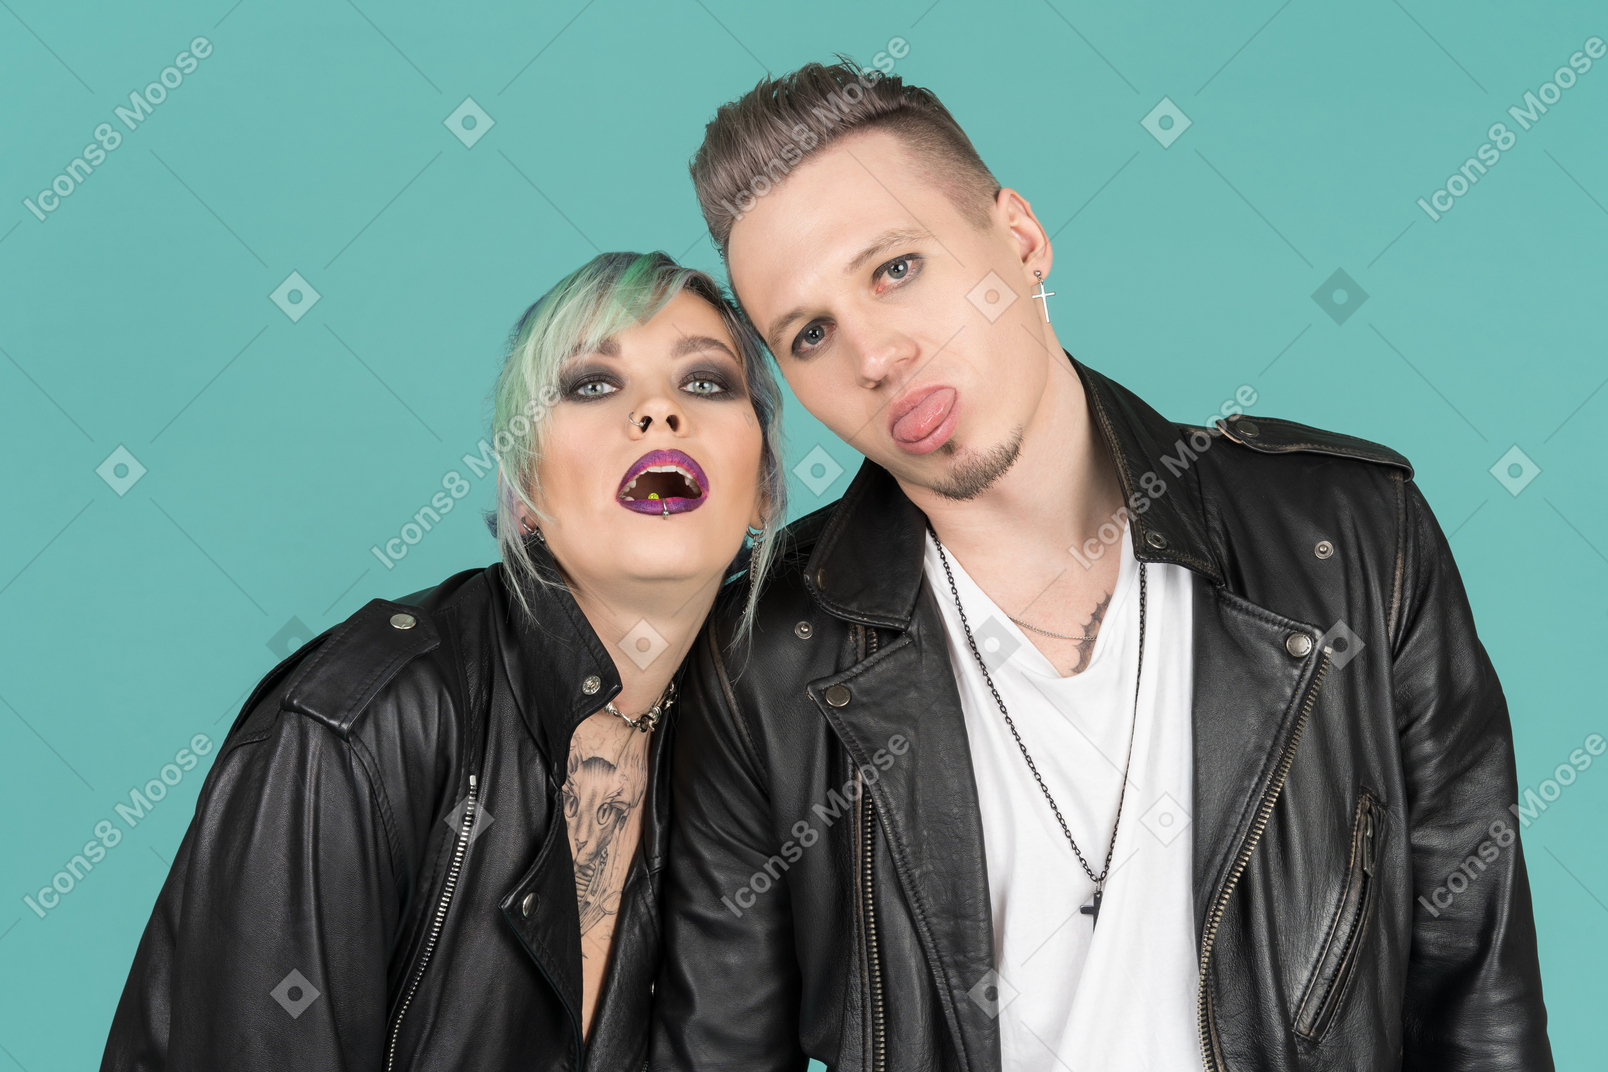 Punk couple showing tongues and making faces